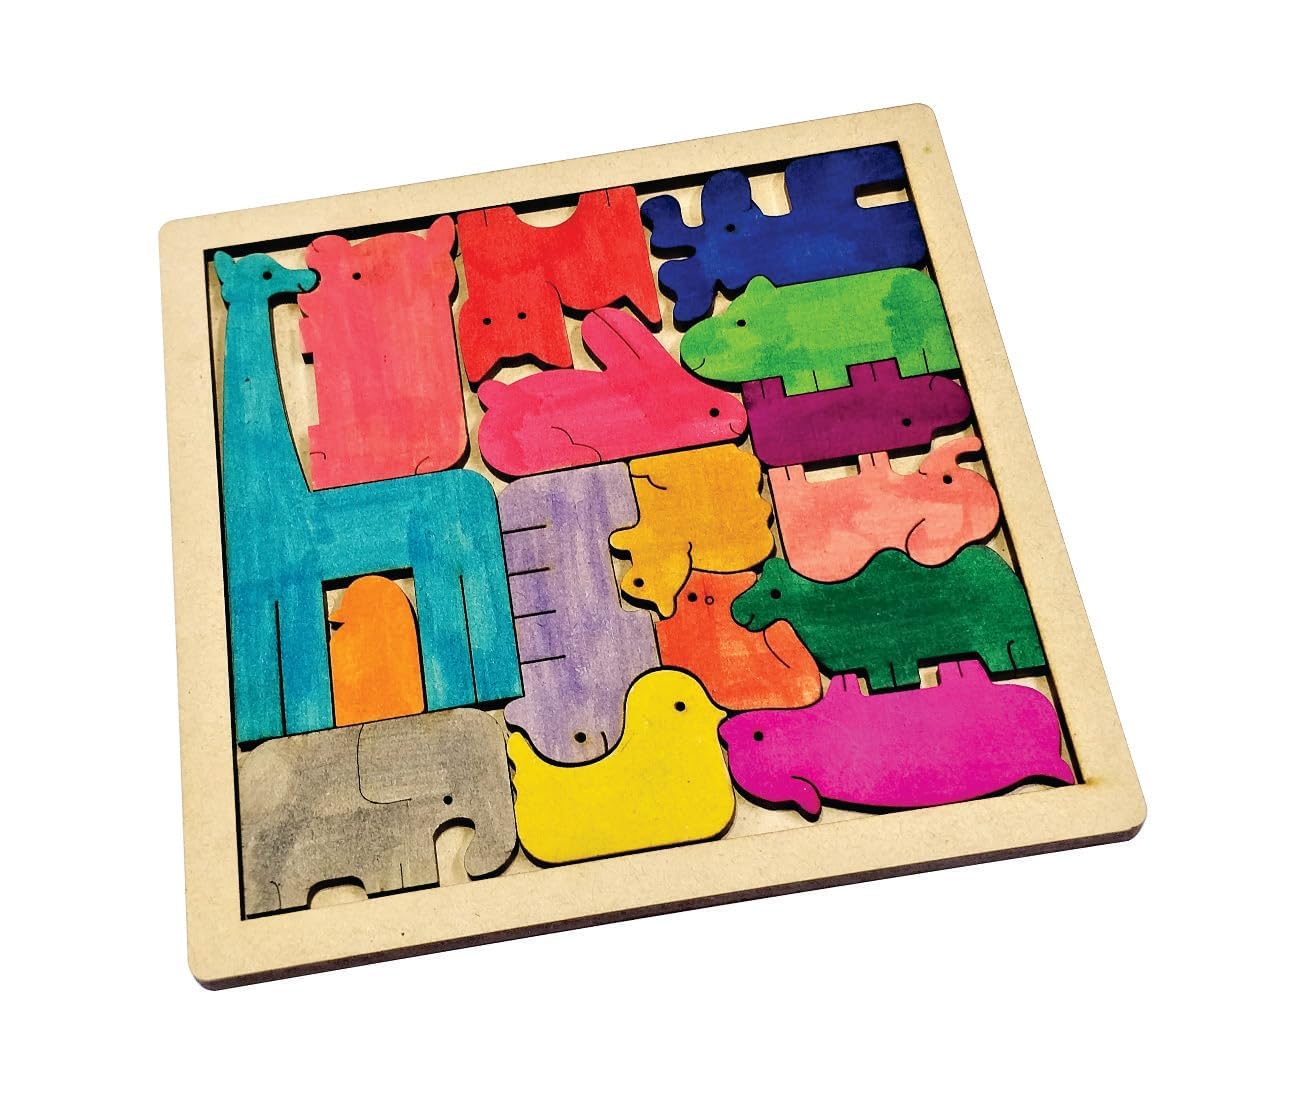 Braintastic Wooden Jigsaw Puzzle Travel Board Game Learning & Creative Educational Intelligence Brain Games Sorting Puzzle Toys for Kids (Animal Puzzle 16 PO12)